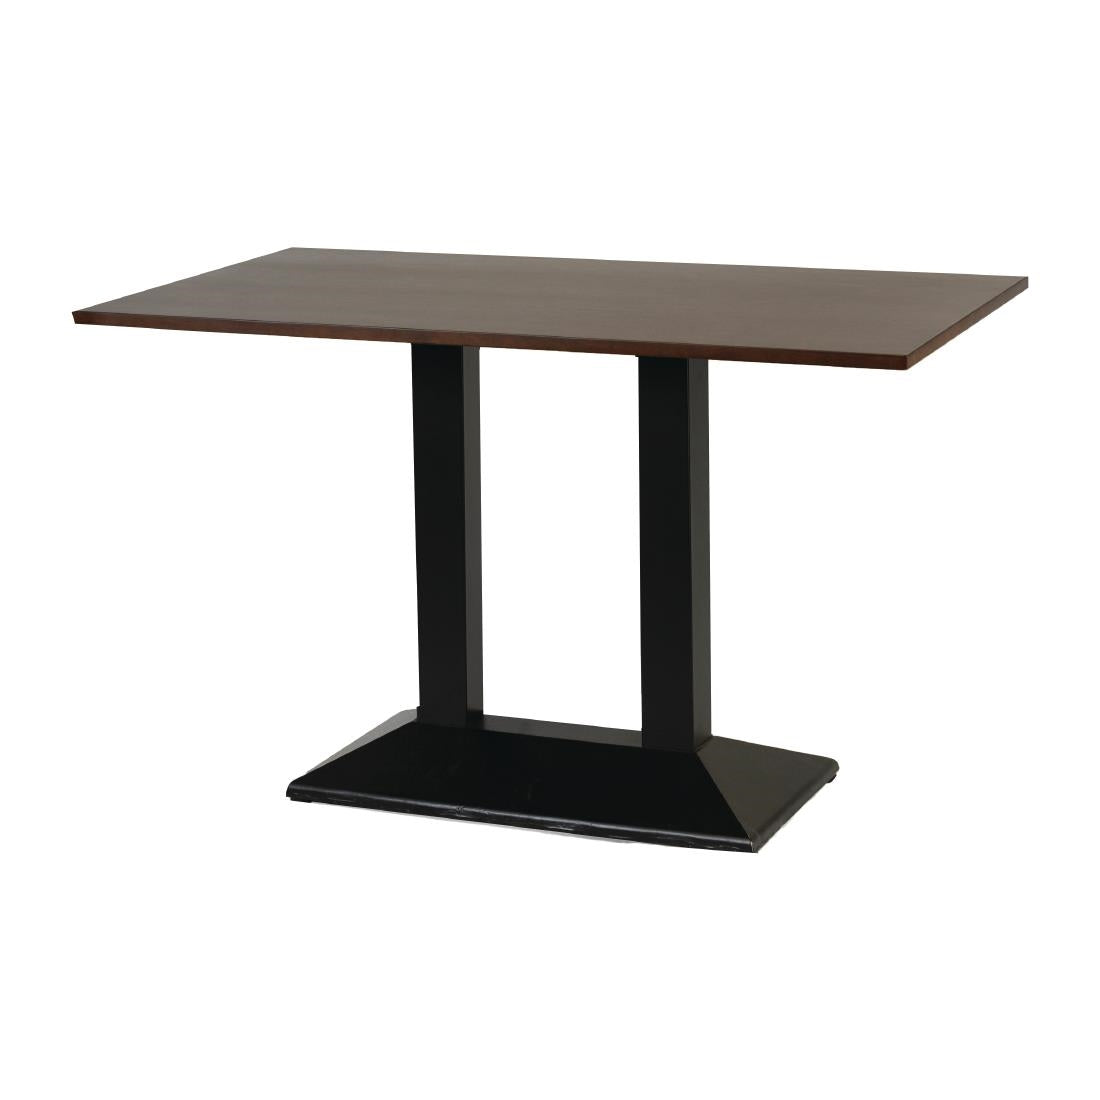 FT503 Turin Metal Base Pedestal Rectangle Table with Dark Wood Top 1200x700mm JD Catering Equipment Solutions Ltd